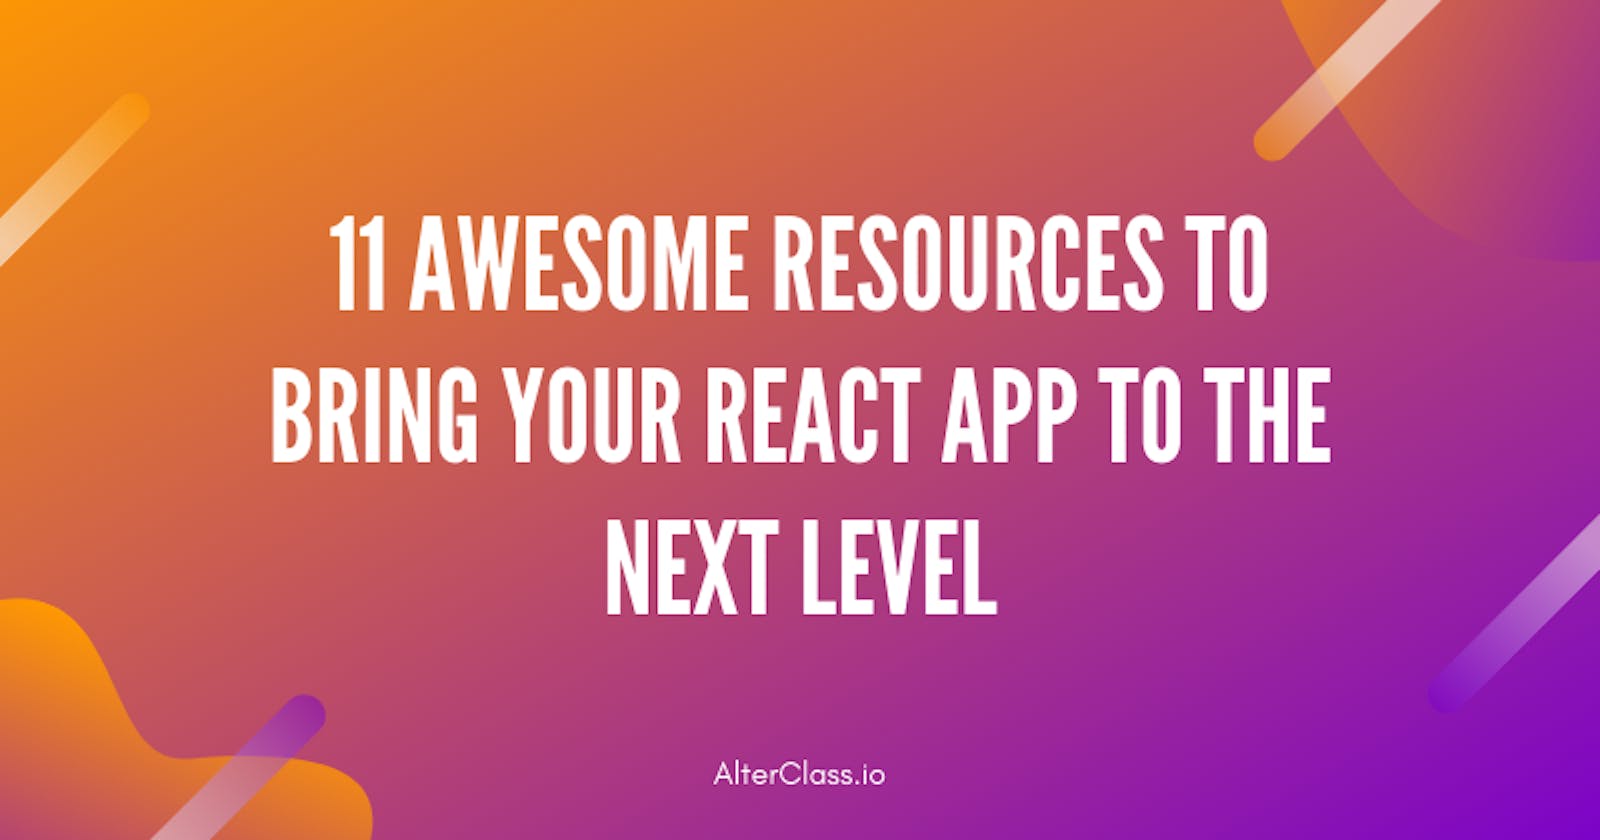 11 Awesome Resources To Bring Your React App to The Next Level